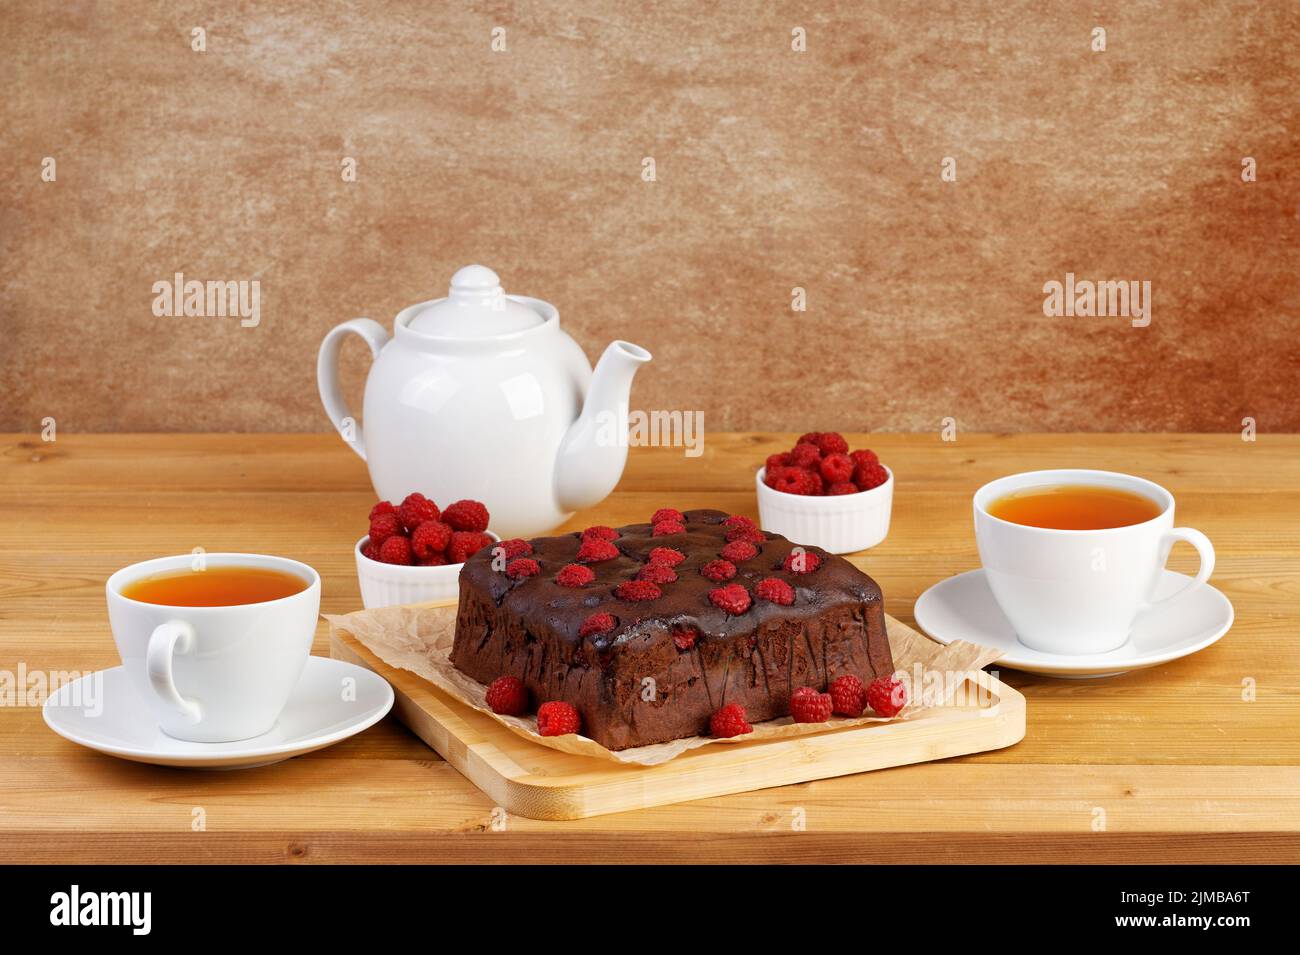 Homemade cake with raspberries and two cups of tea on wooden table. Copyspace. Stock Photo